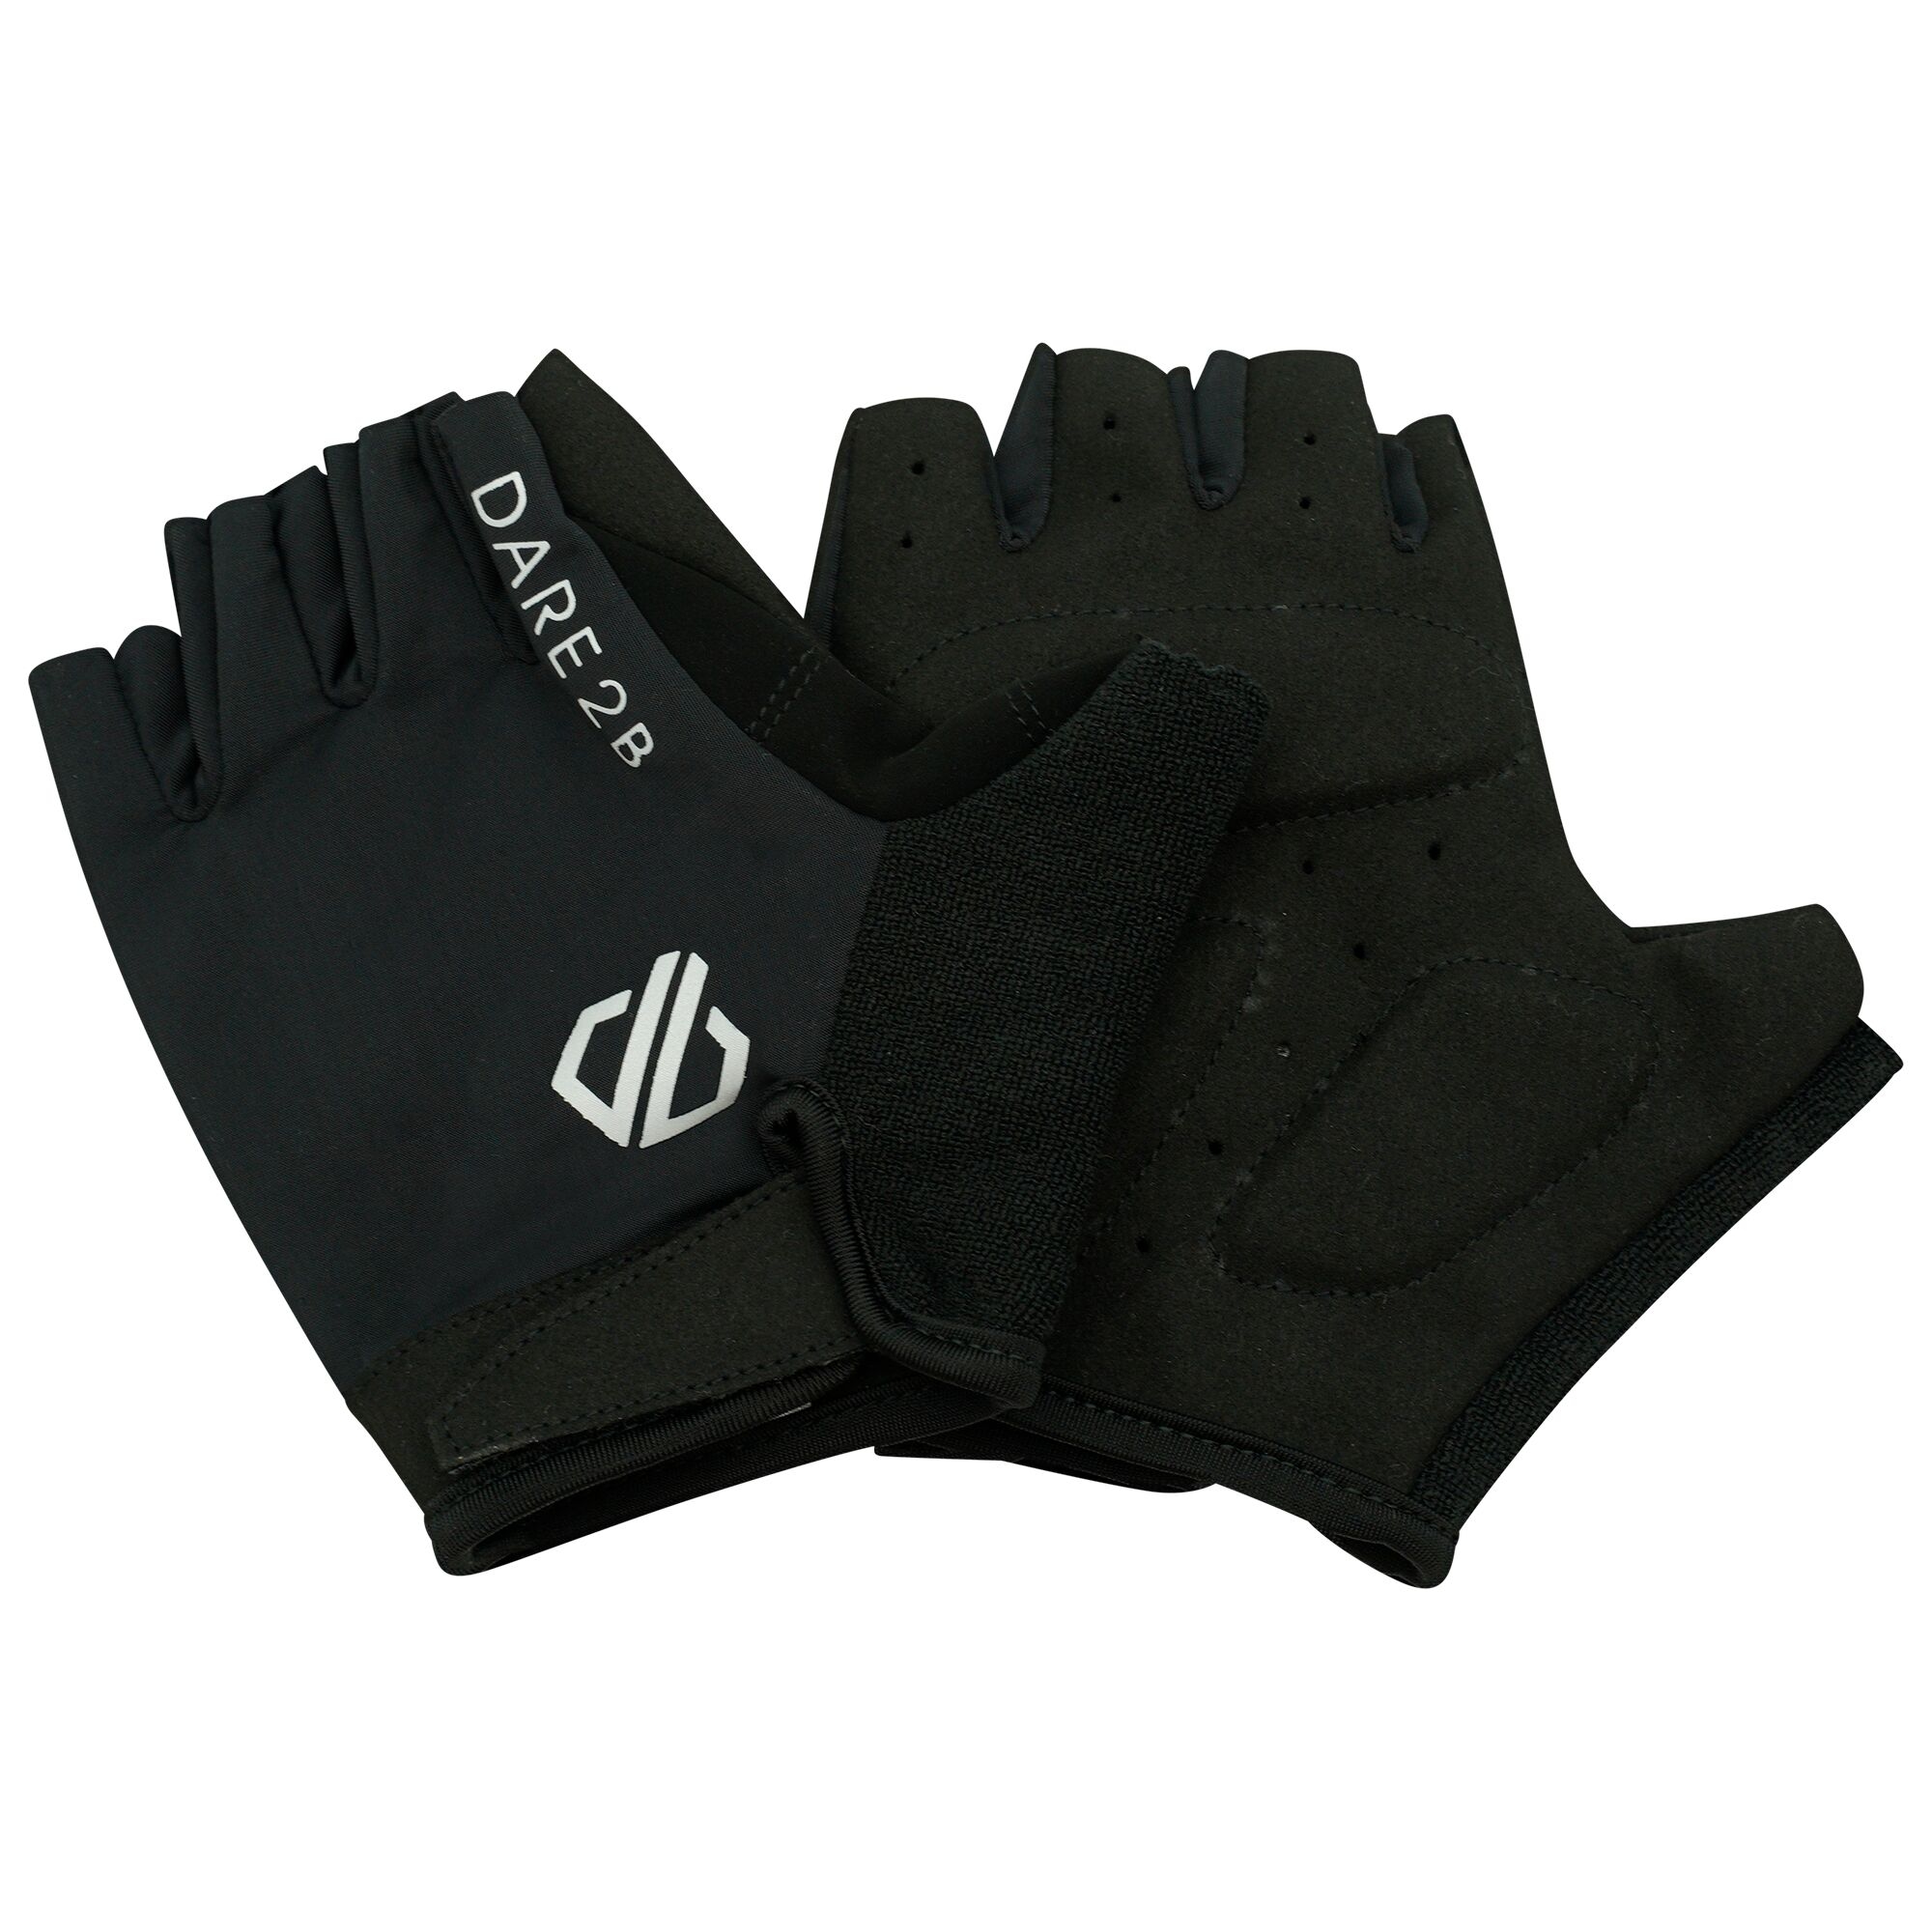 Photos - Winter Gloves & Mittens DARE 2B Men's Lightweight Pedal Out Fingerless Cycling Gloves Black, Size: 